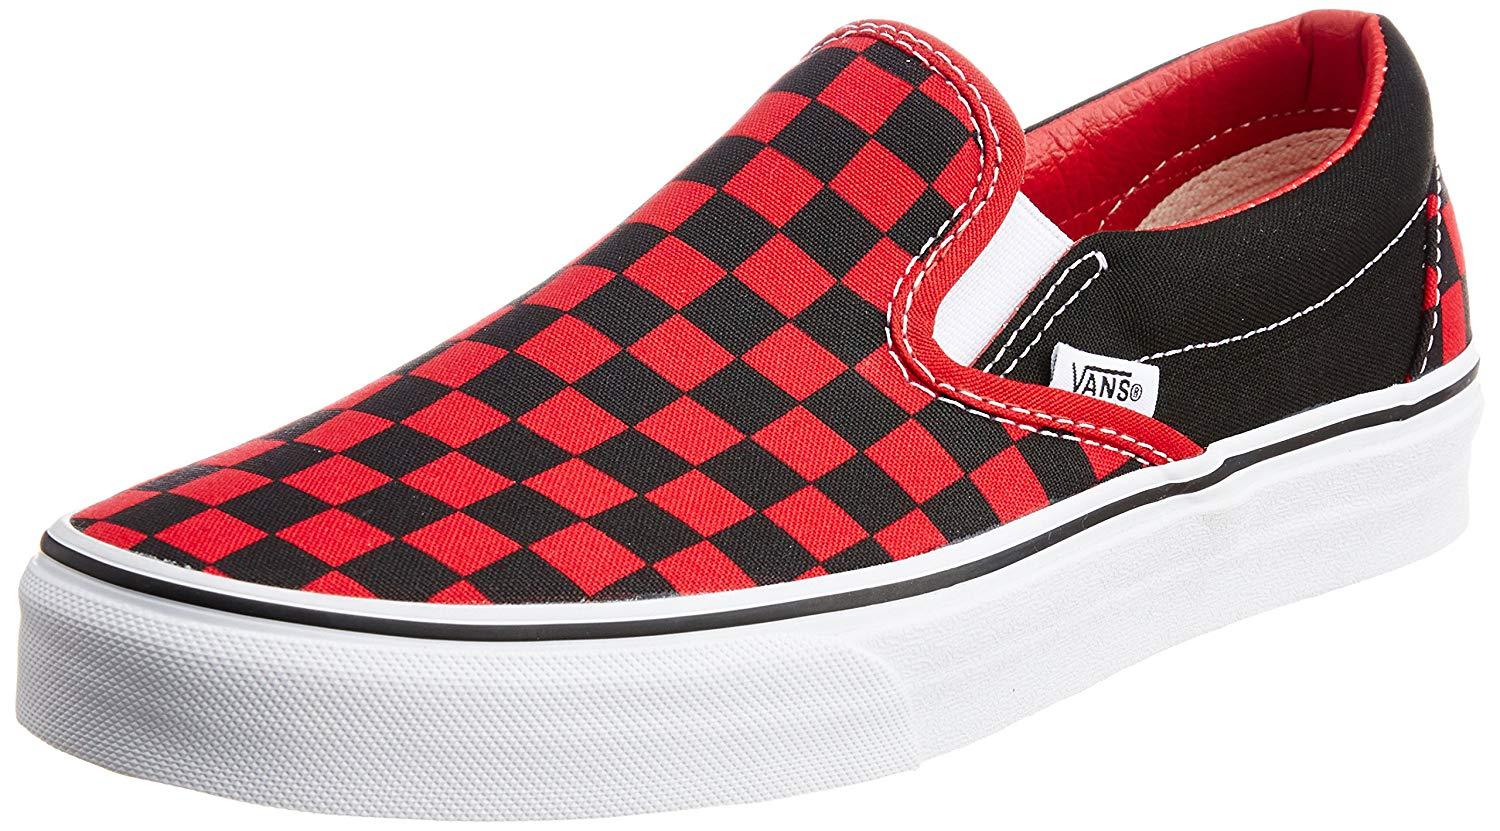 Checkerd Vans Red Logo - Vans Men's Classic Slip On Checkerboard Red And Black Canvas Boat